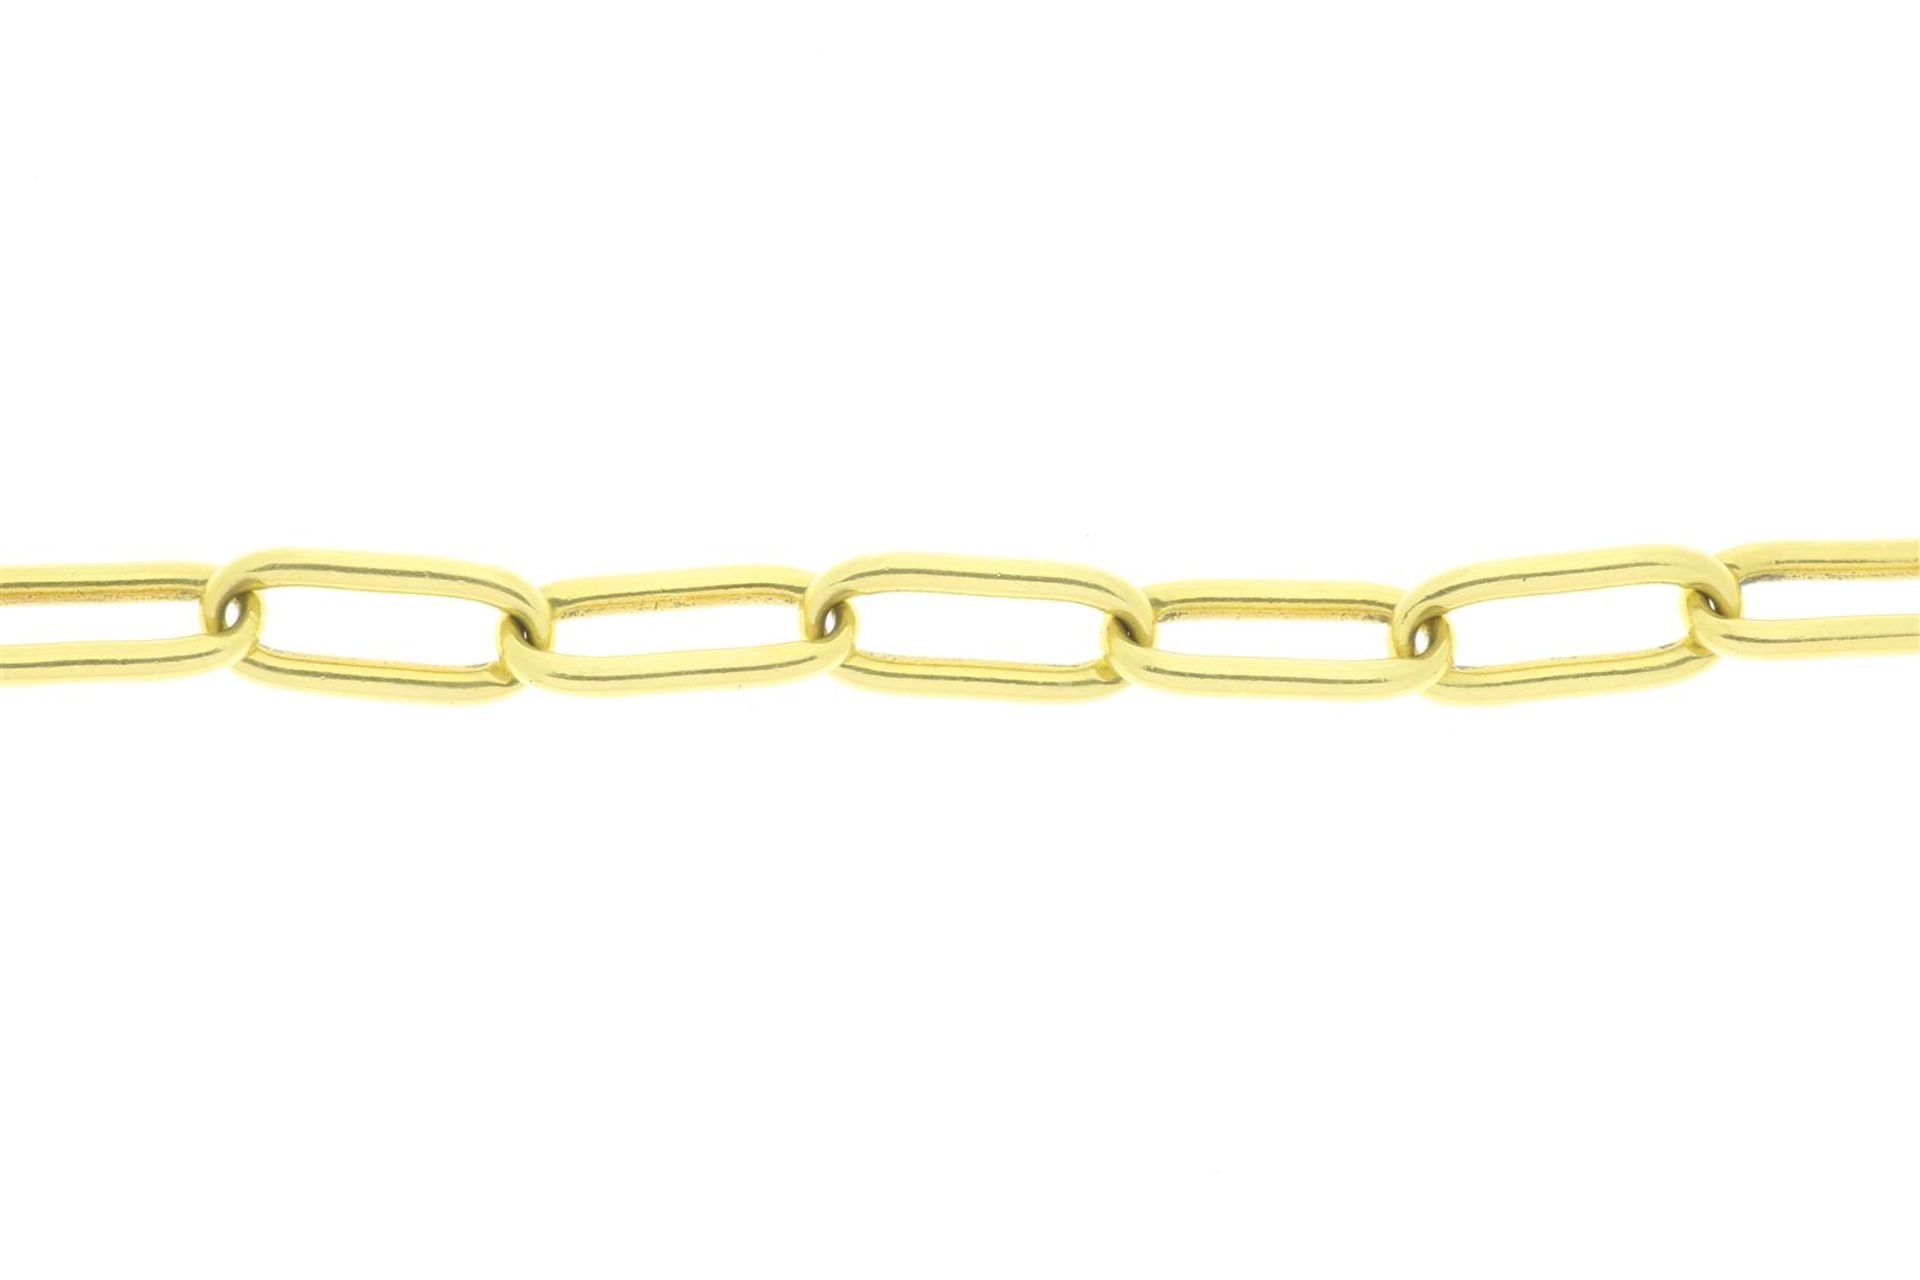 Yellow gold closed forever bracelet, length 20 cm, gross weight 29.6 grams. (one loose link).